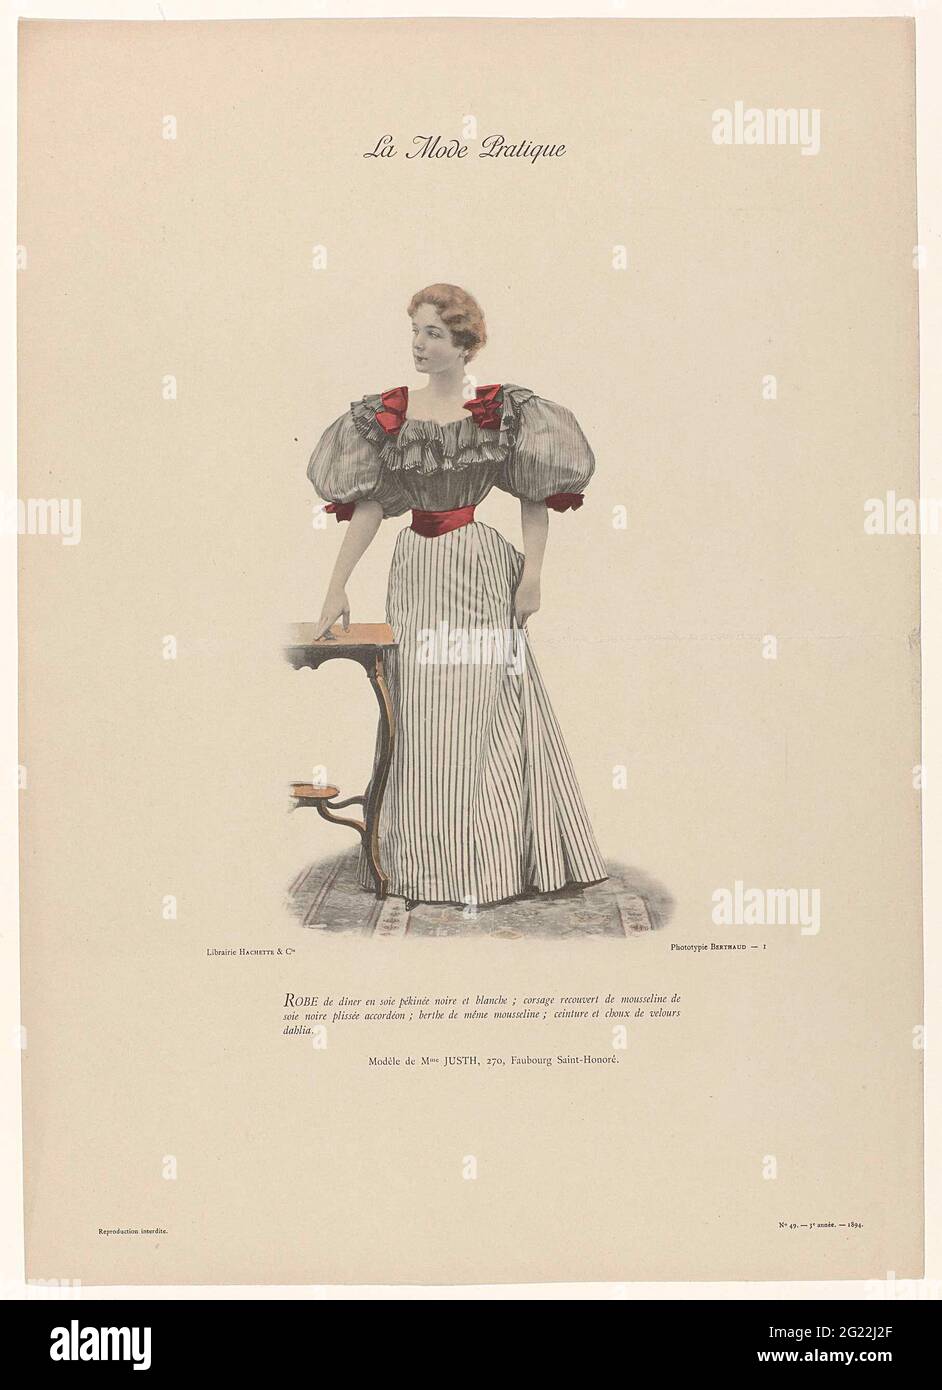 La Mode Pratique, 1894, 3rd Année, No. 49: Robe de Diner and Soie Pékiné  (...). Woman in a dining japon of black and white striped 'soie pékinée',  the bodice is covered with